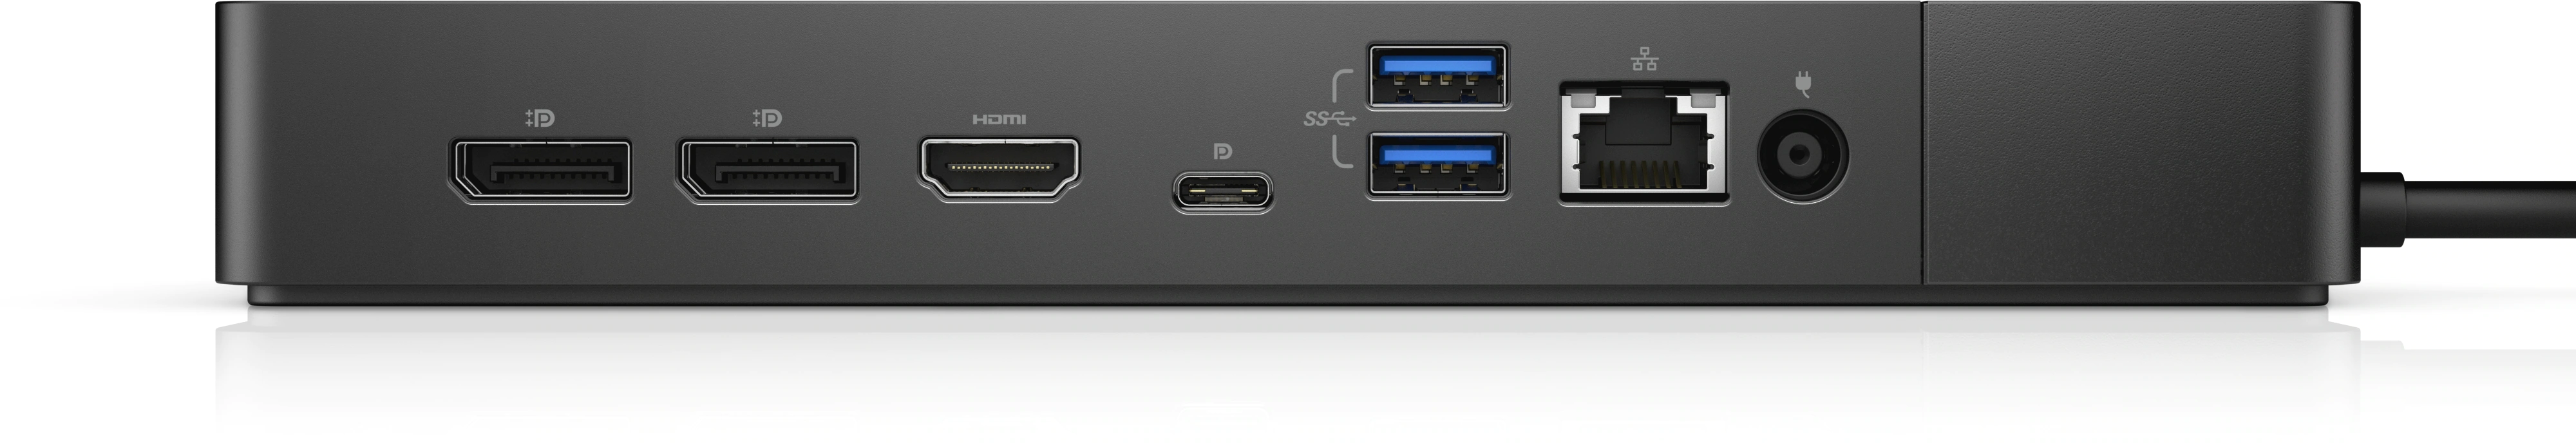 Dell Docking Station - WD19S 130W 5